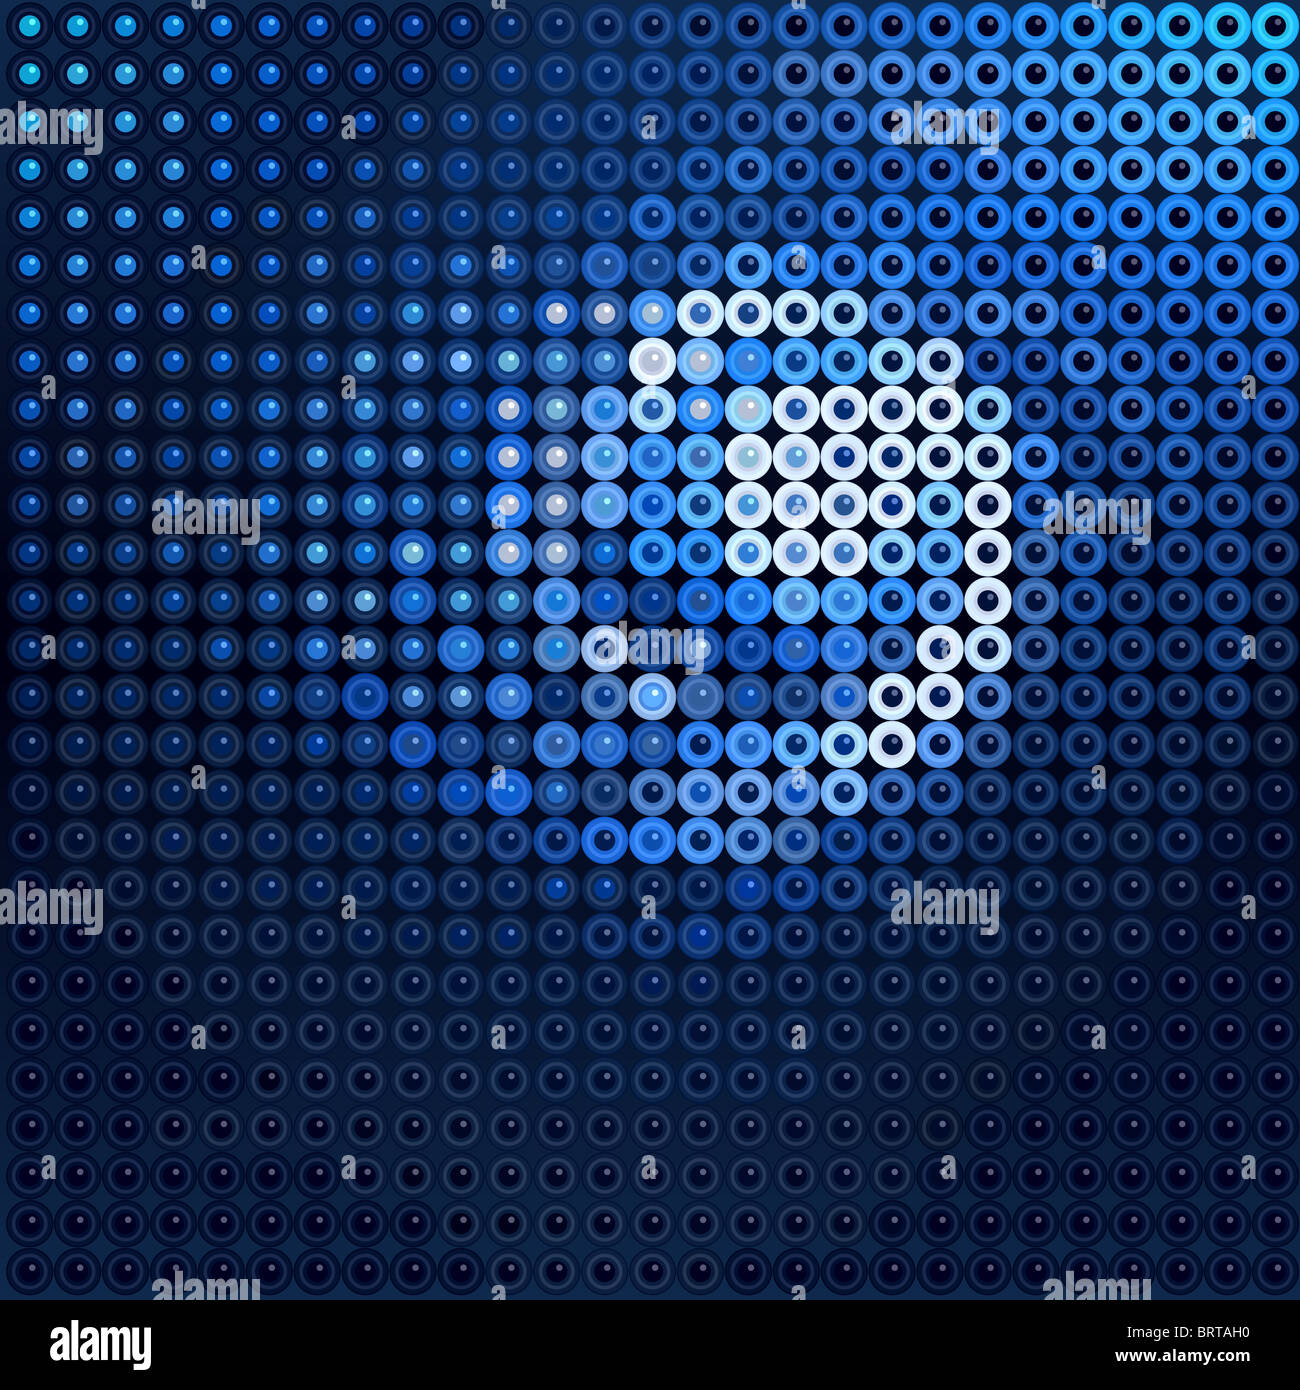 Abstract illustrated design of a blue spiral shape Stock Photo